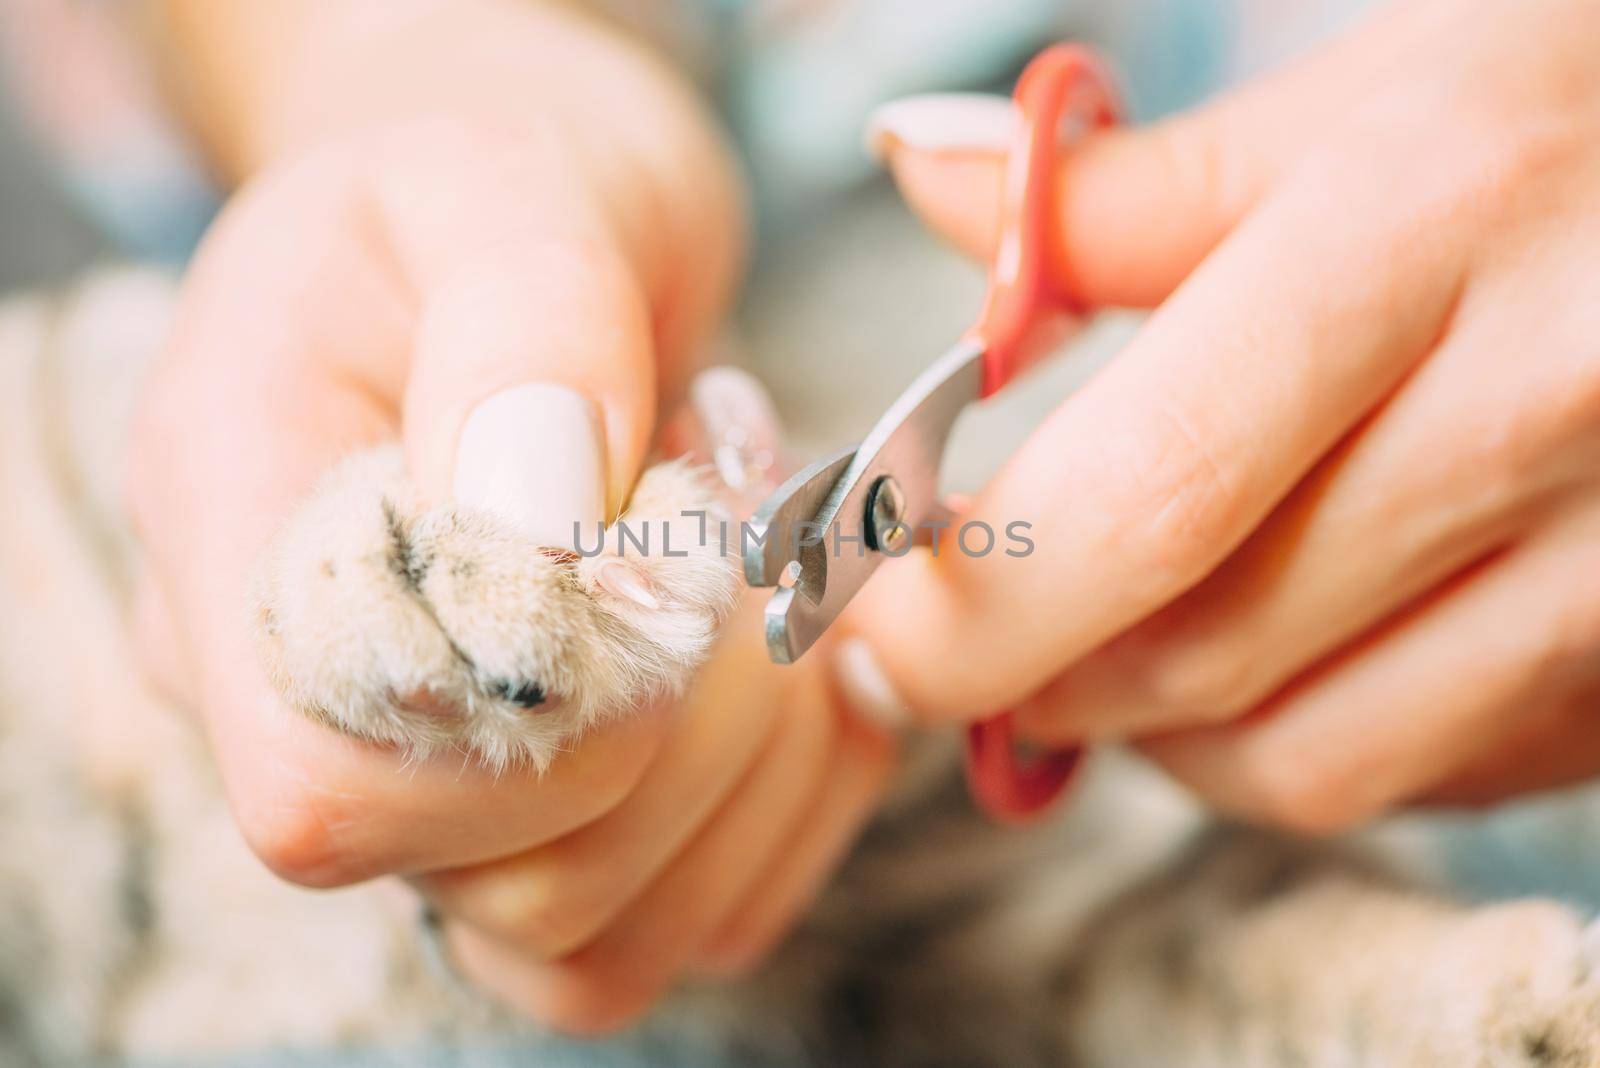 Woman holding cat paw and cutting nails, close-up.